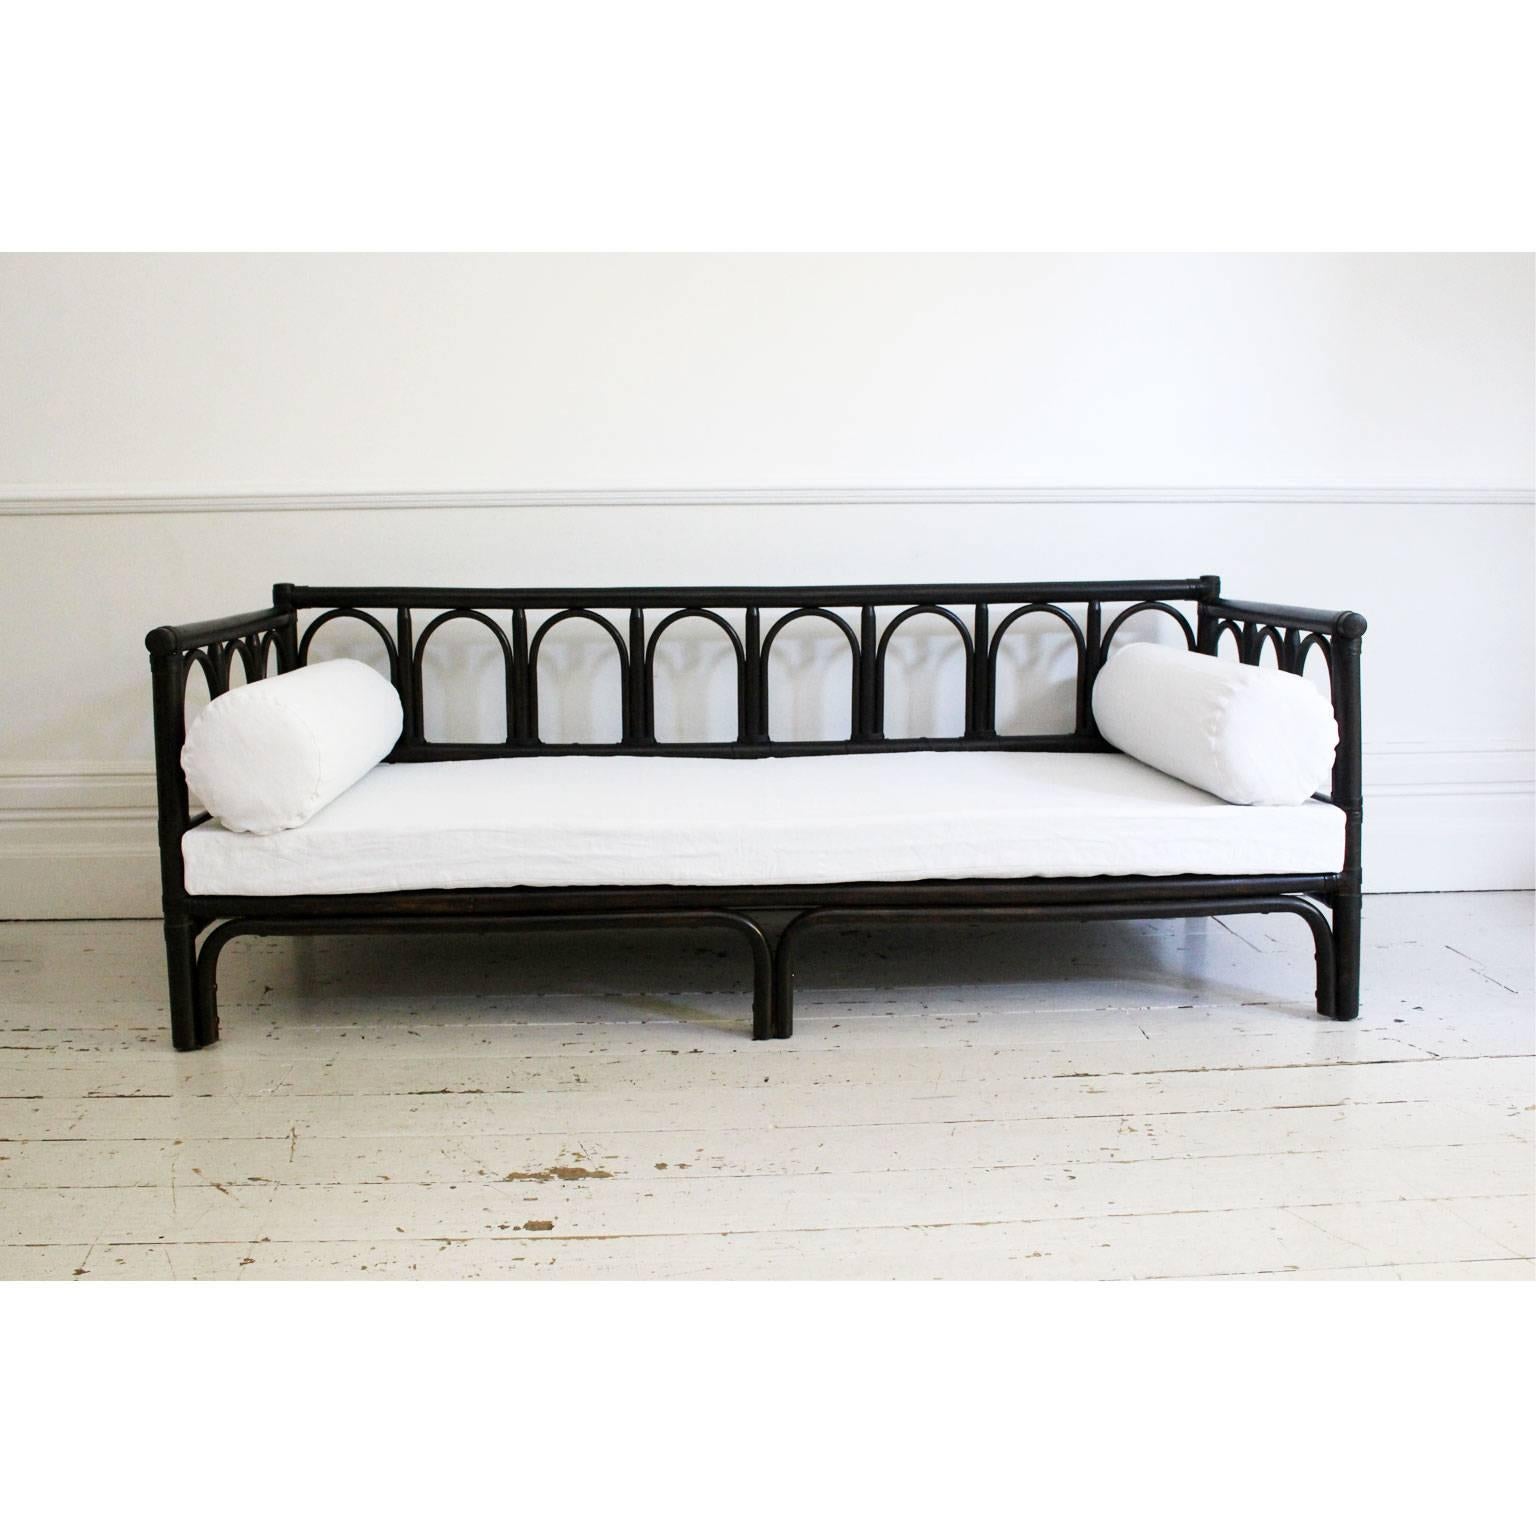 We love this incredibly chic 1970s French bamboo sofa or daybed. The colour is a wonderful, rich, dark brown/black. Charlotte has made cushions and mattress covers for it from antique French linen (which are included in the price). The base is in